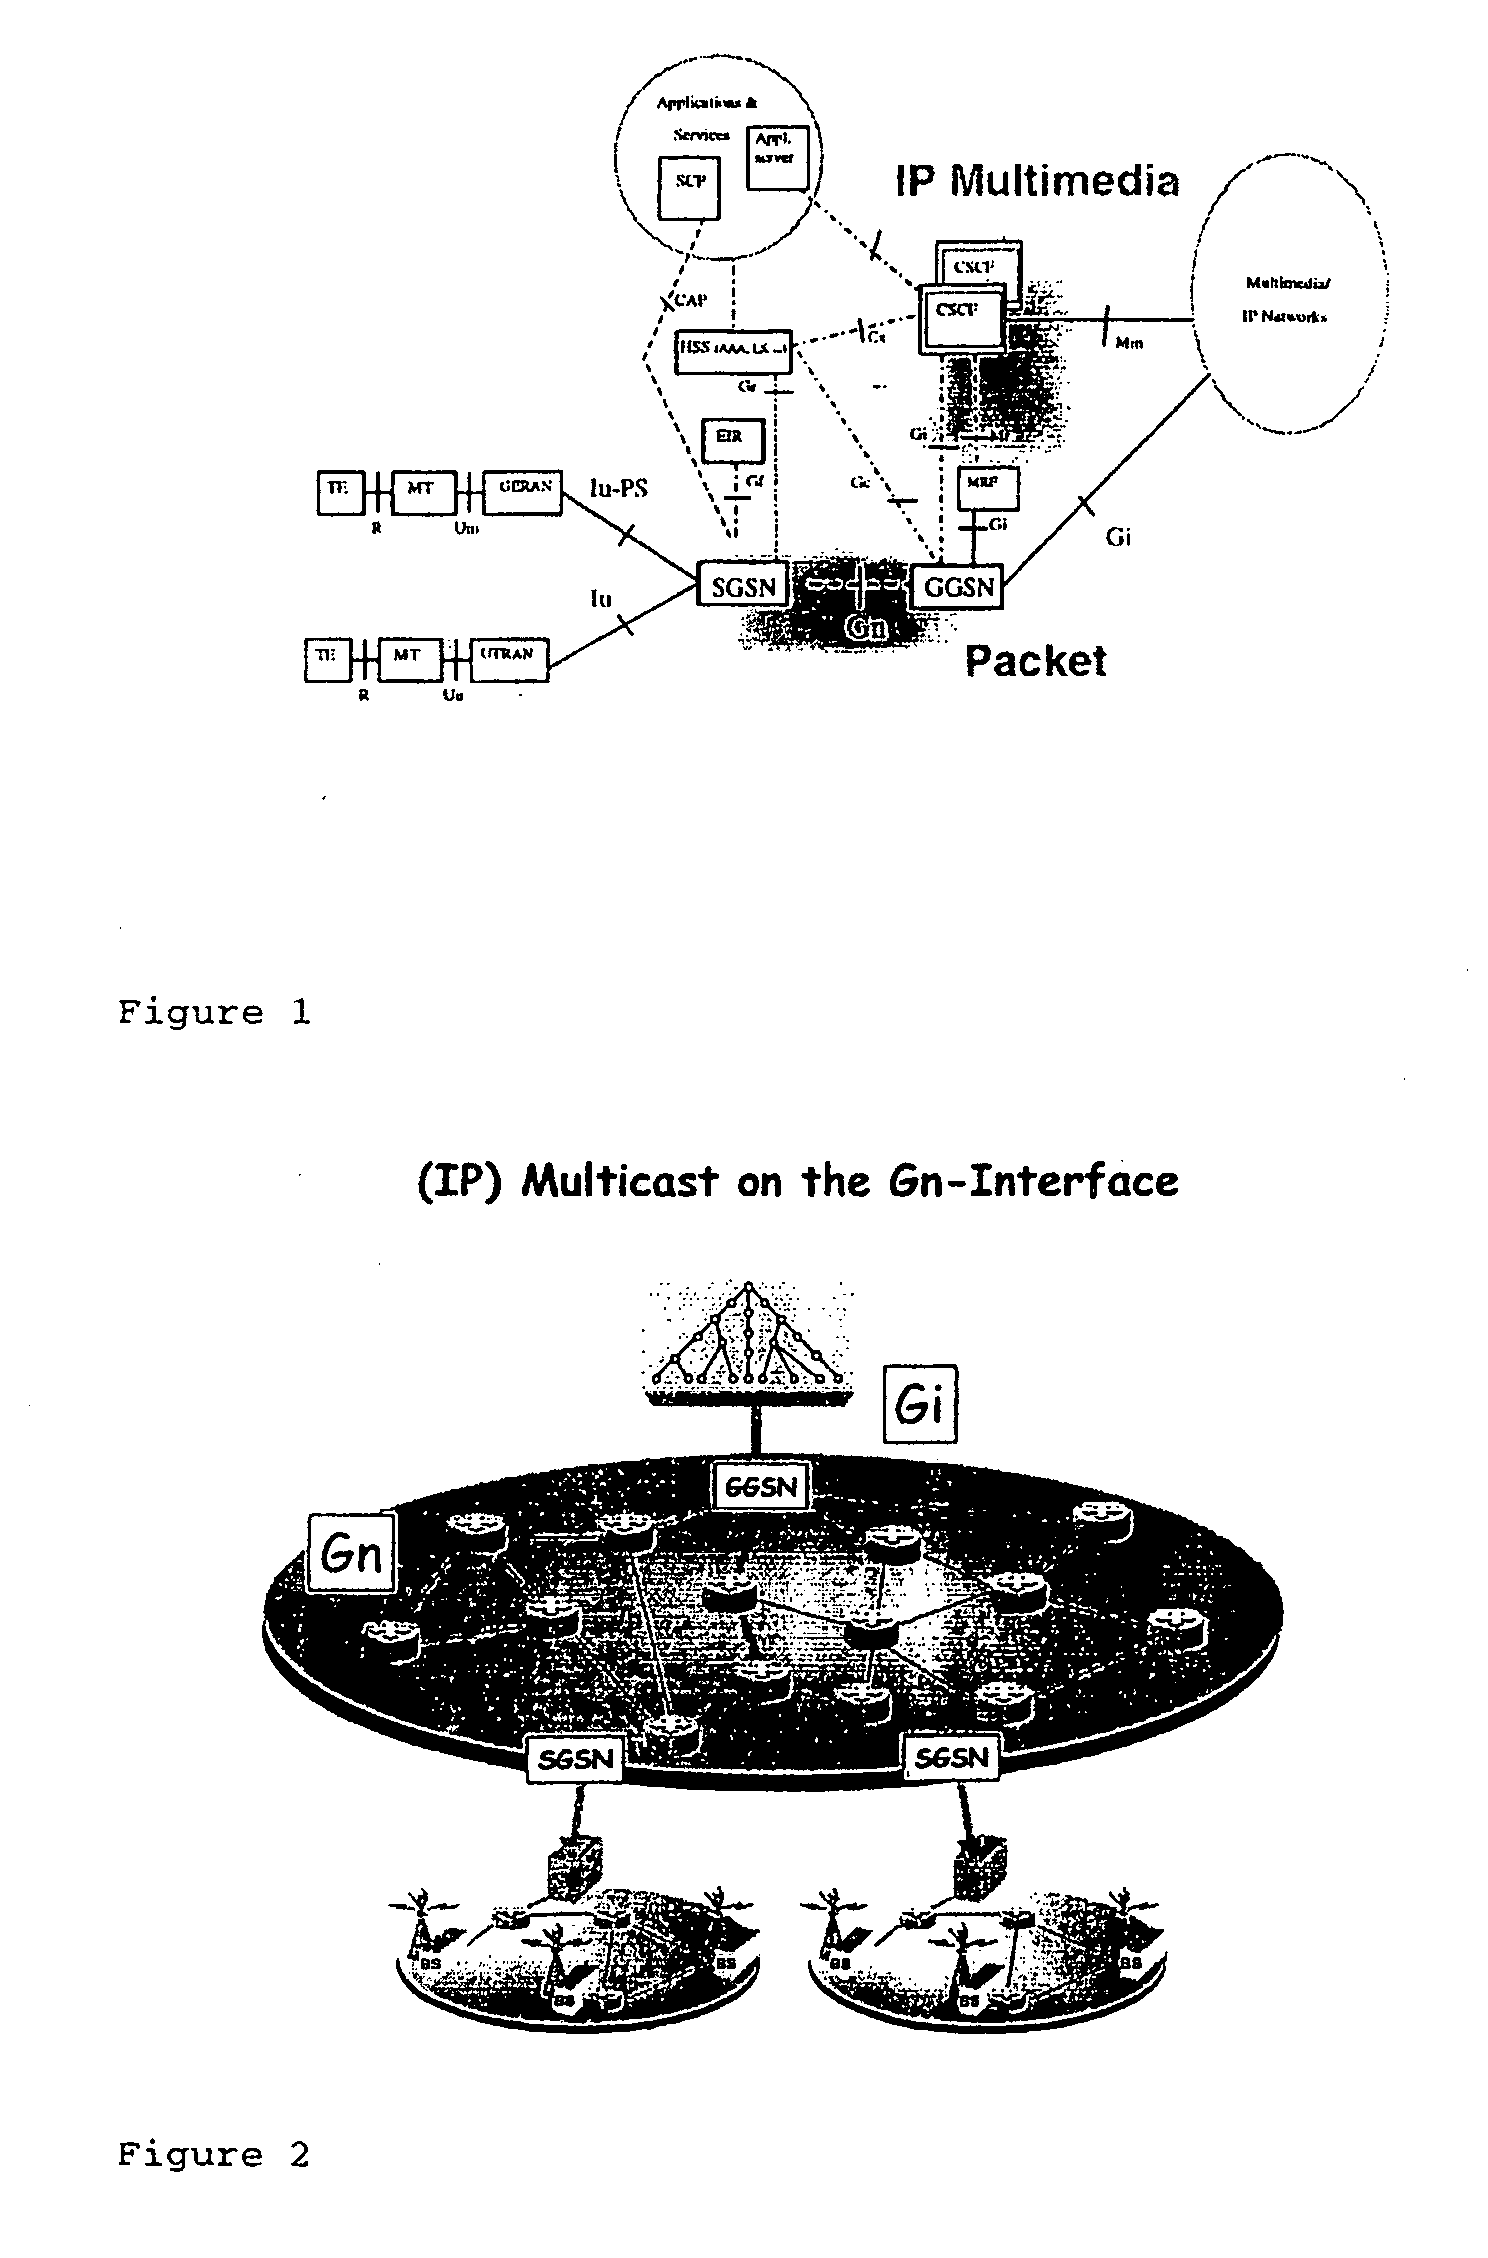 Multicast in a point-to point oriented packet-switched telecommunication network